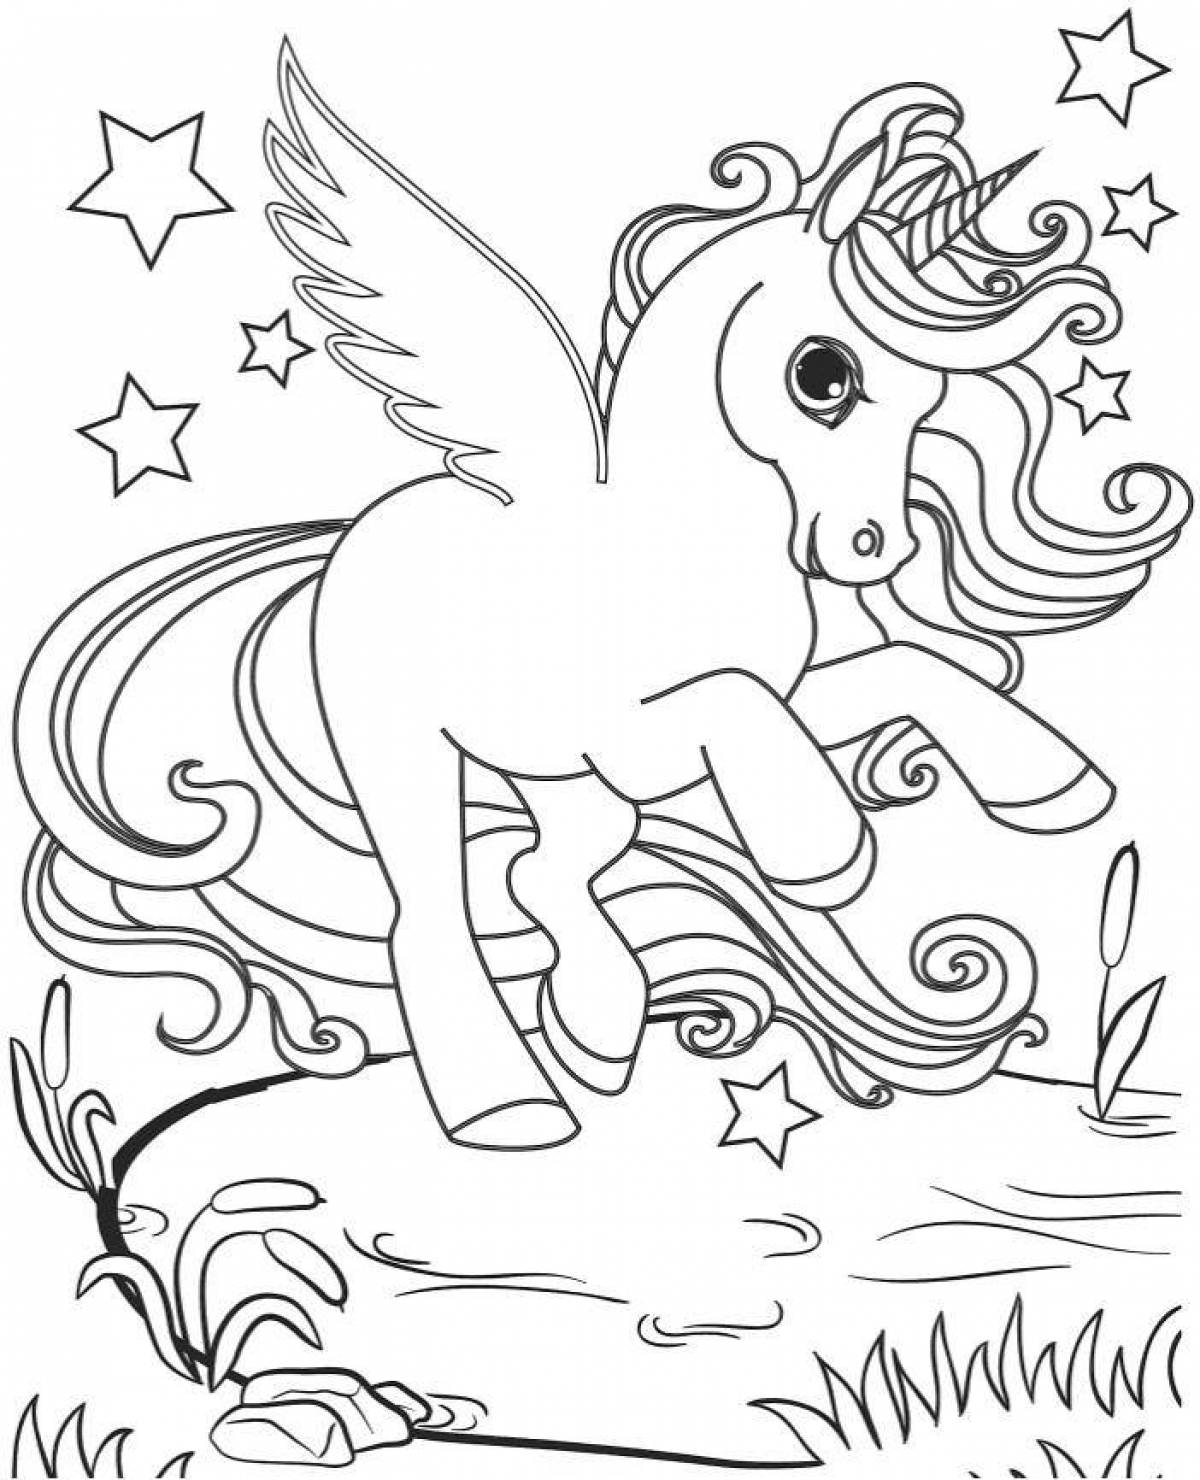 Amazing coloring pages for kids 5-6 years old unicorns